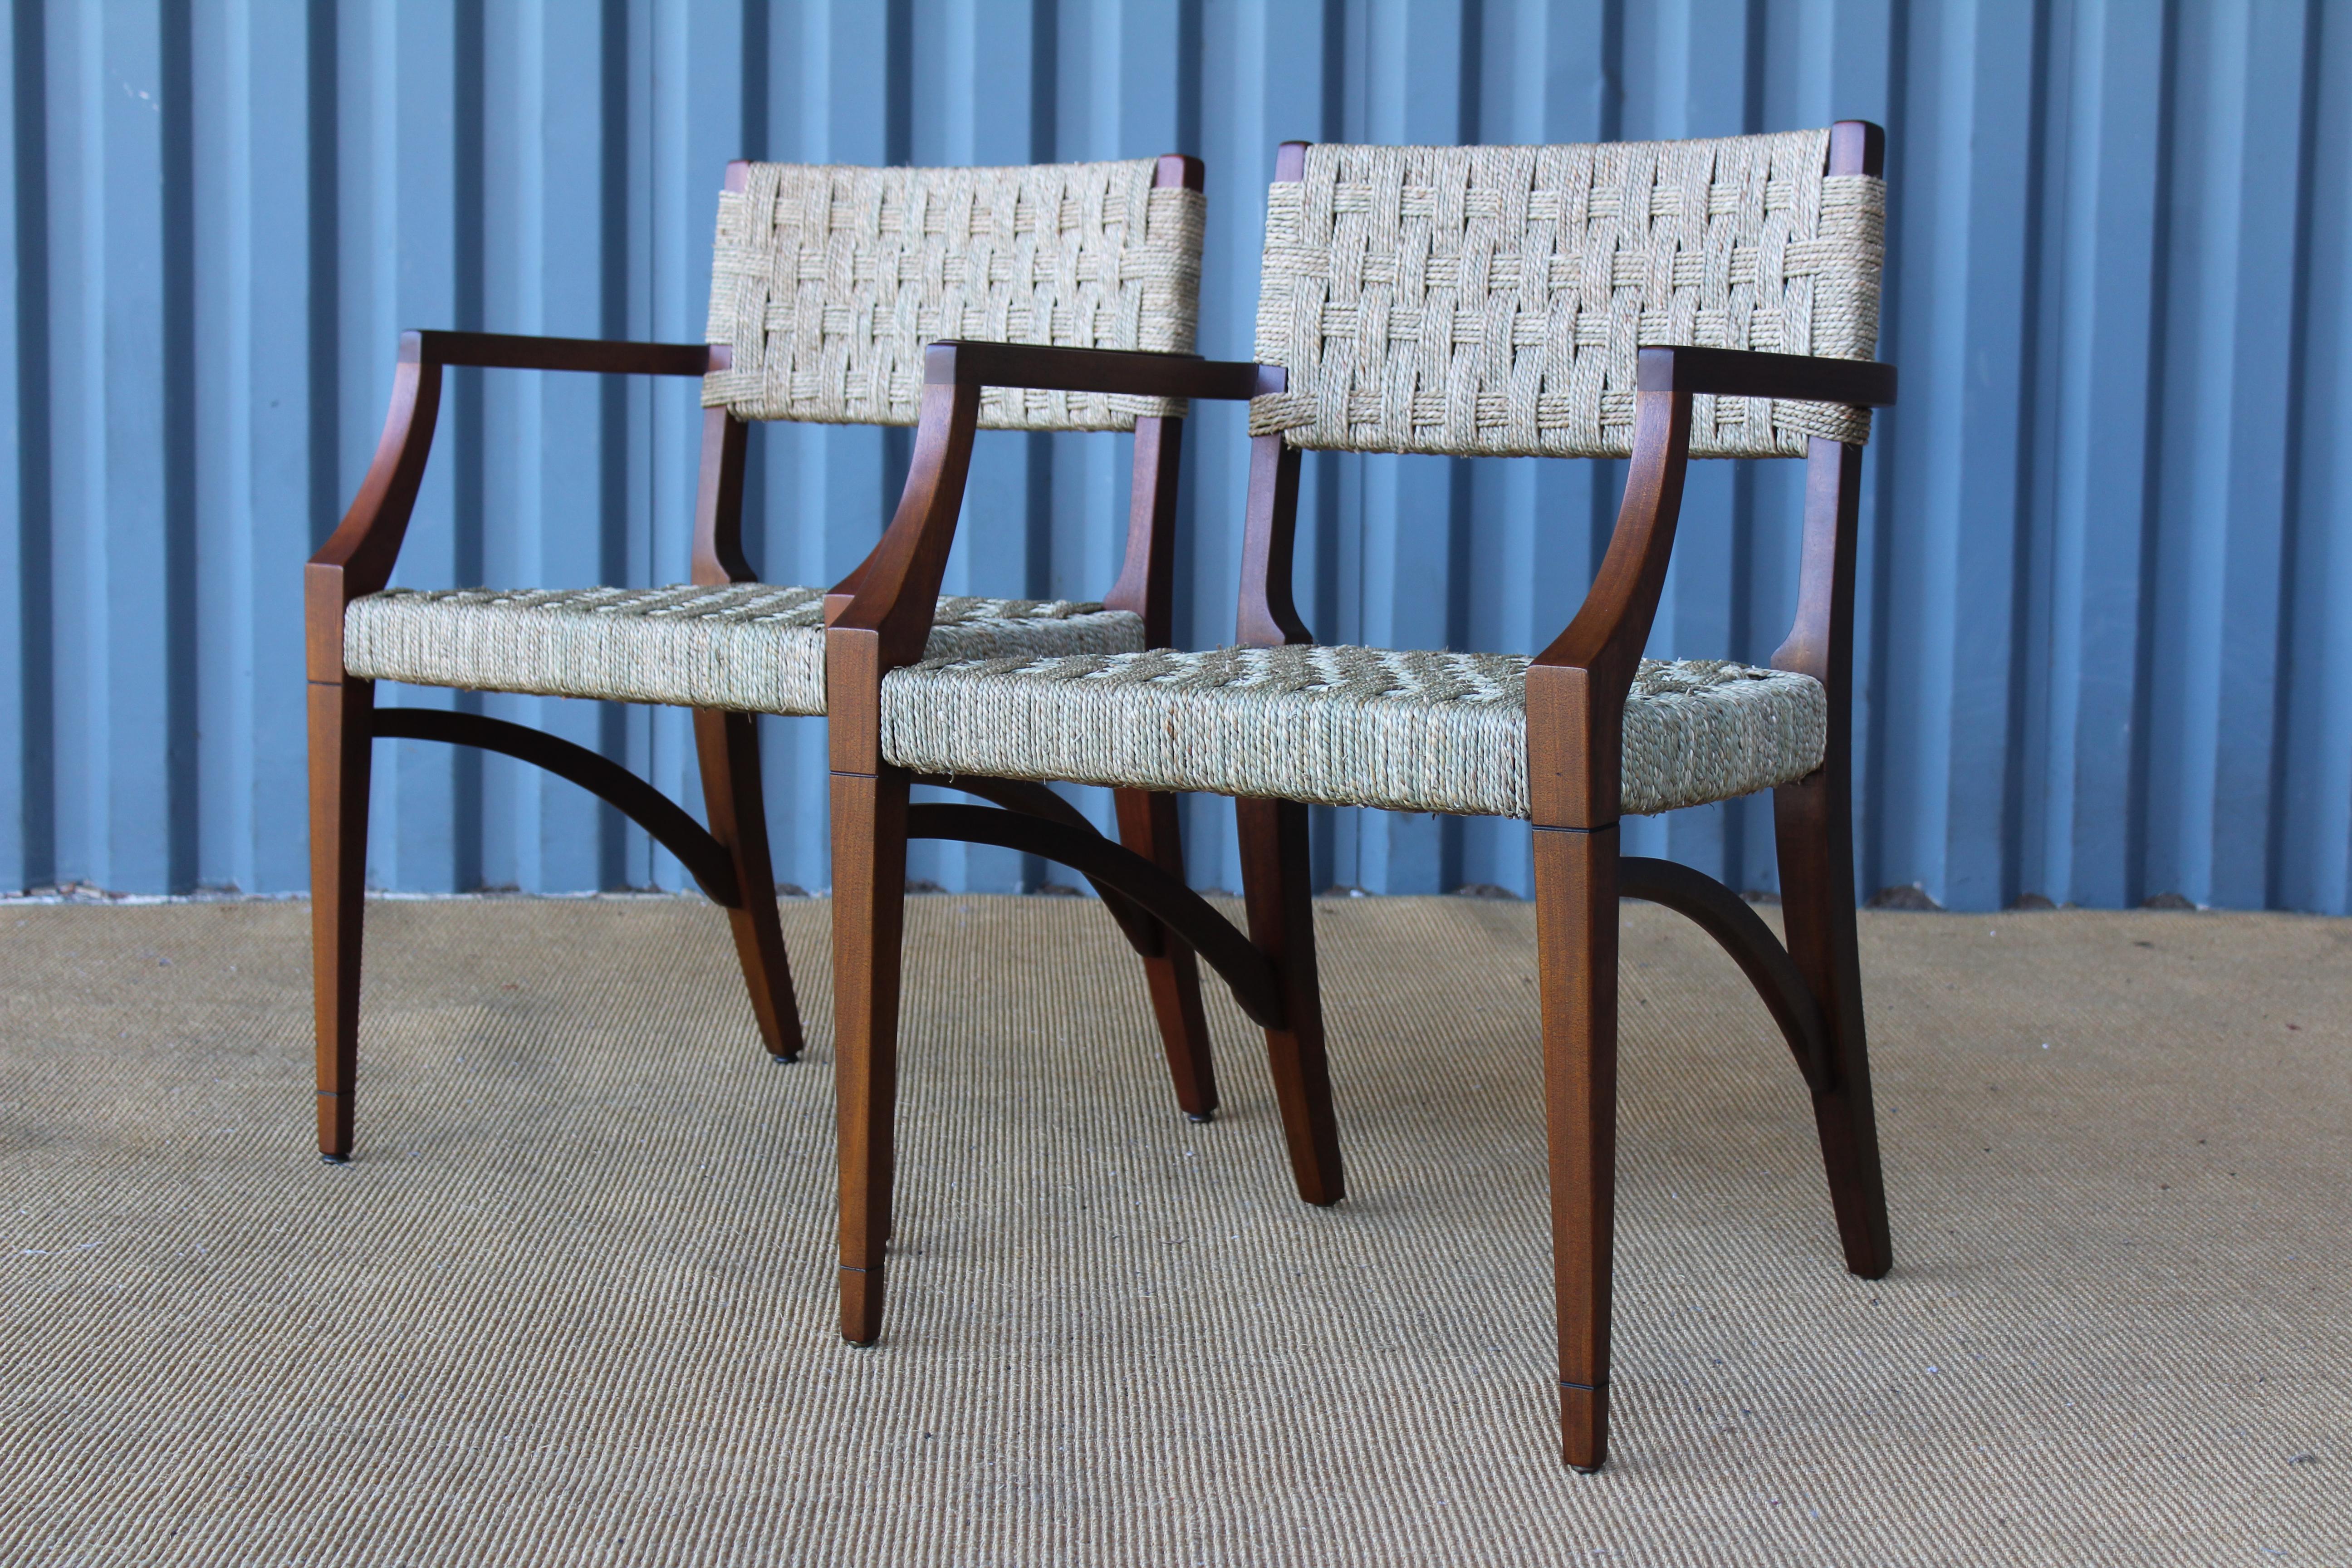 Pair of mahogany and sea grass armchairs, in the manner of Audoux-Minet, France, 1950s. The pair have both been refinished and have new woven sea grass seats and backrests.